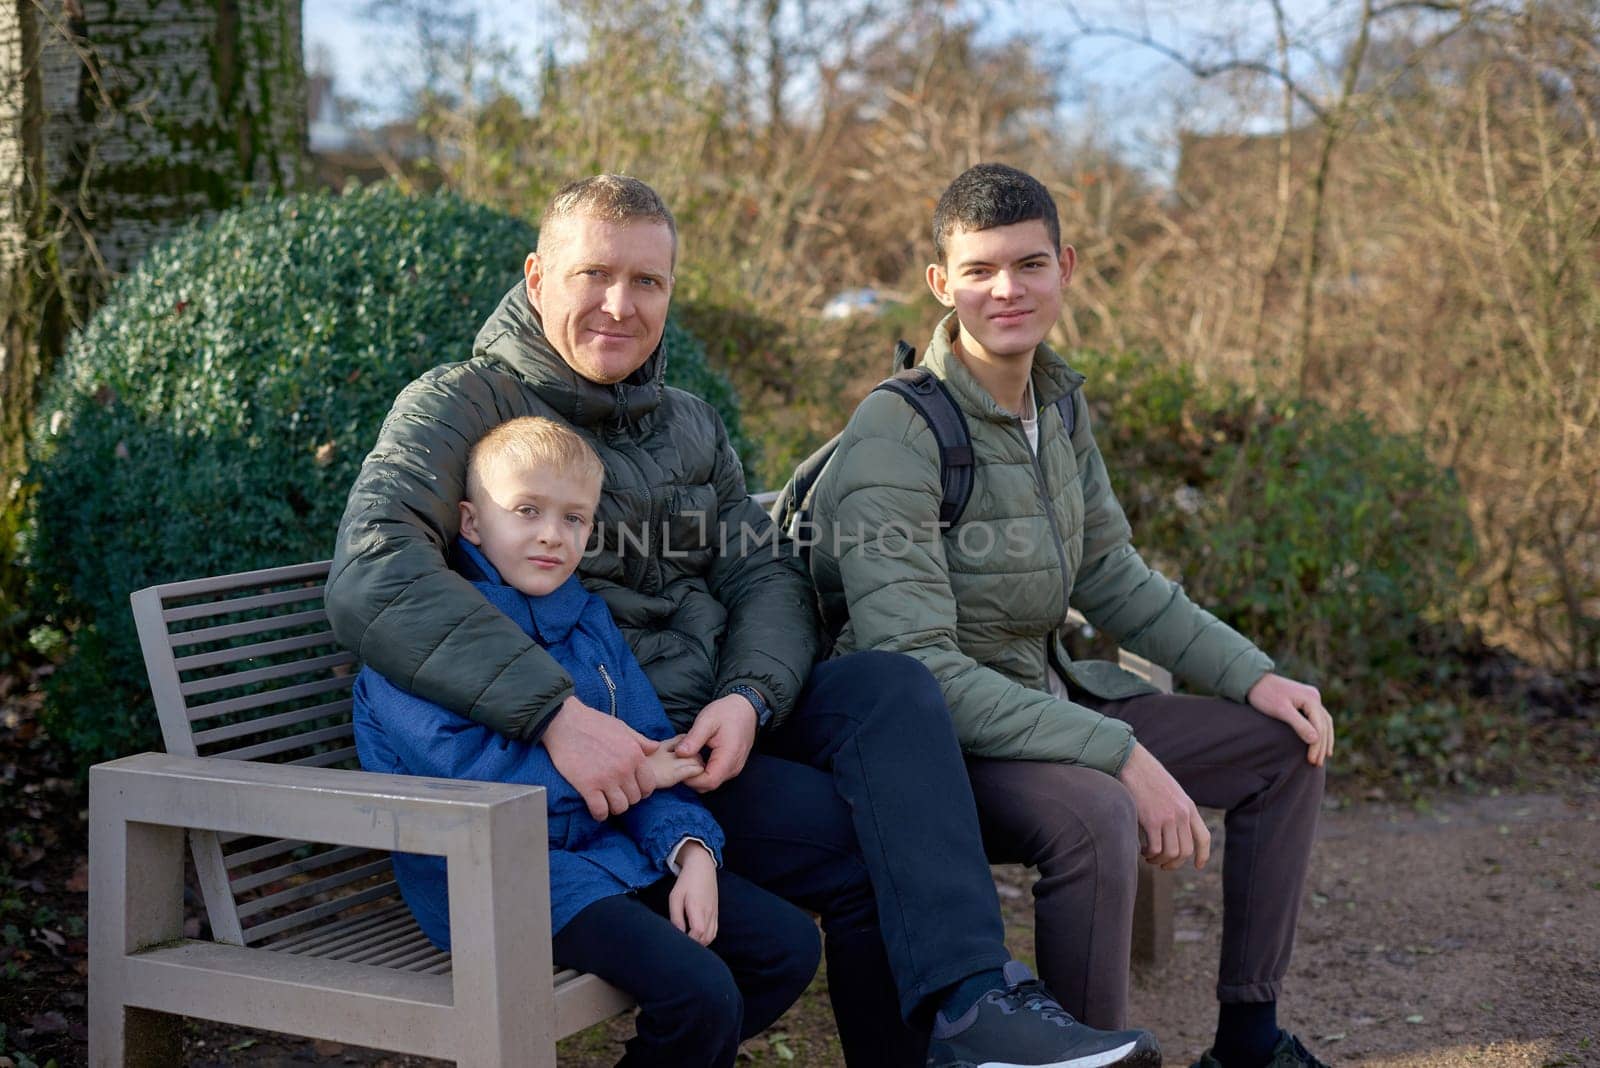 Dad with two sons sitting on a bench in autumn park. Experience the tranquility of familial bonds in the heart of autumn with this serene image. A father, 40 years old, and his two sons - a beautiful 8-year-old boy and a 17-year-old young man, seated in the park. The autumnal ambiance adds warmth to this captivating moment of family togetherness.